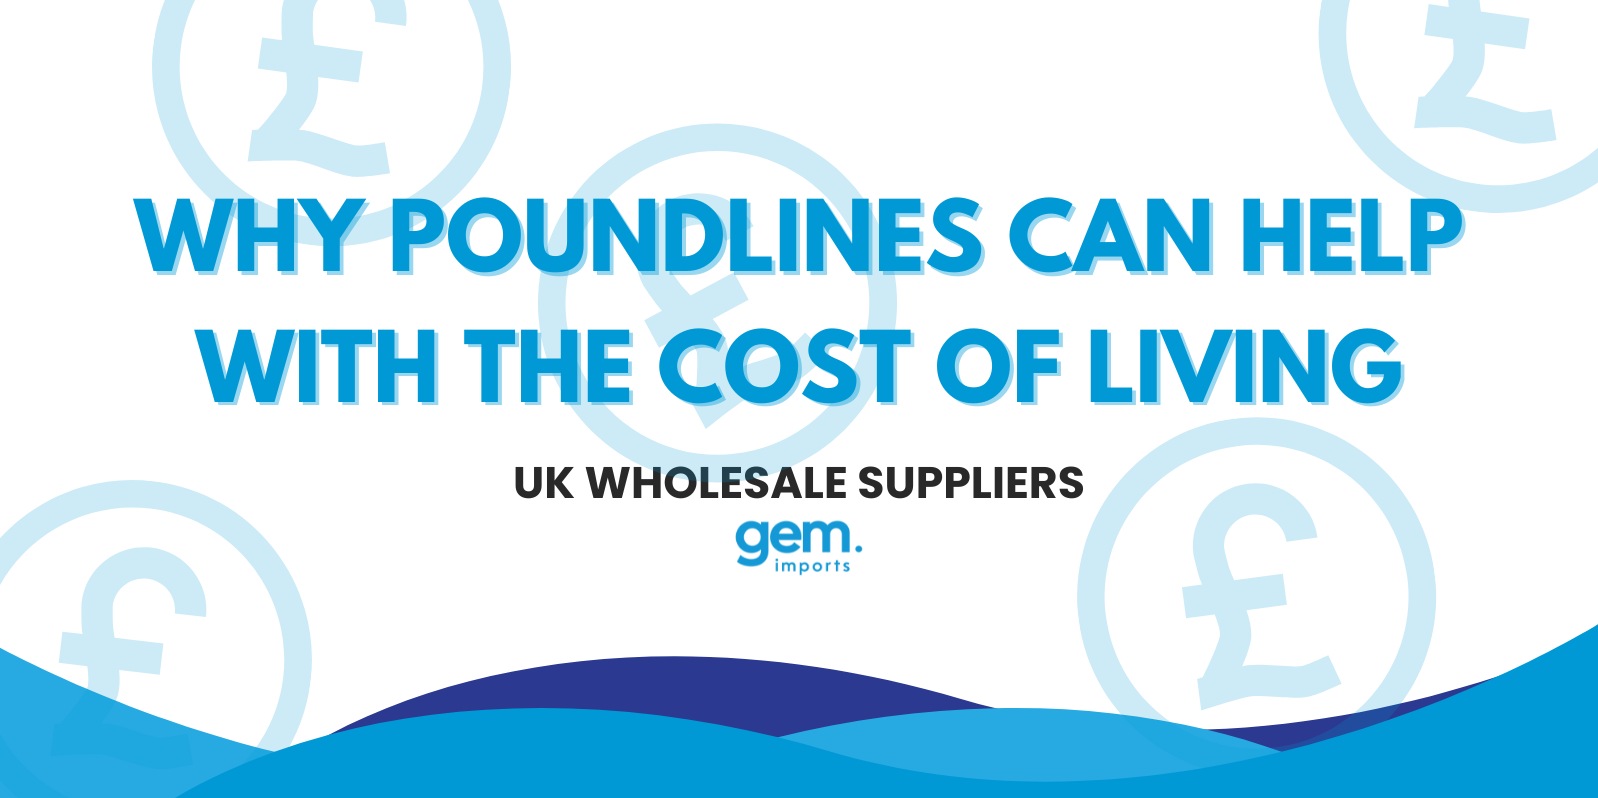 Poundlines from UK wholesale suppliers